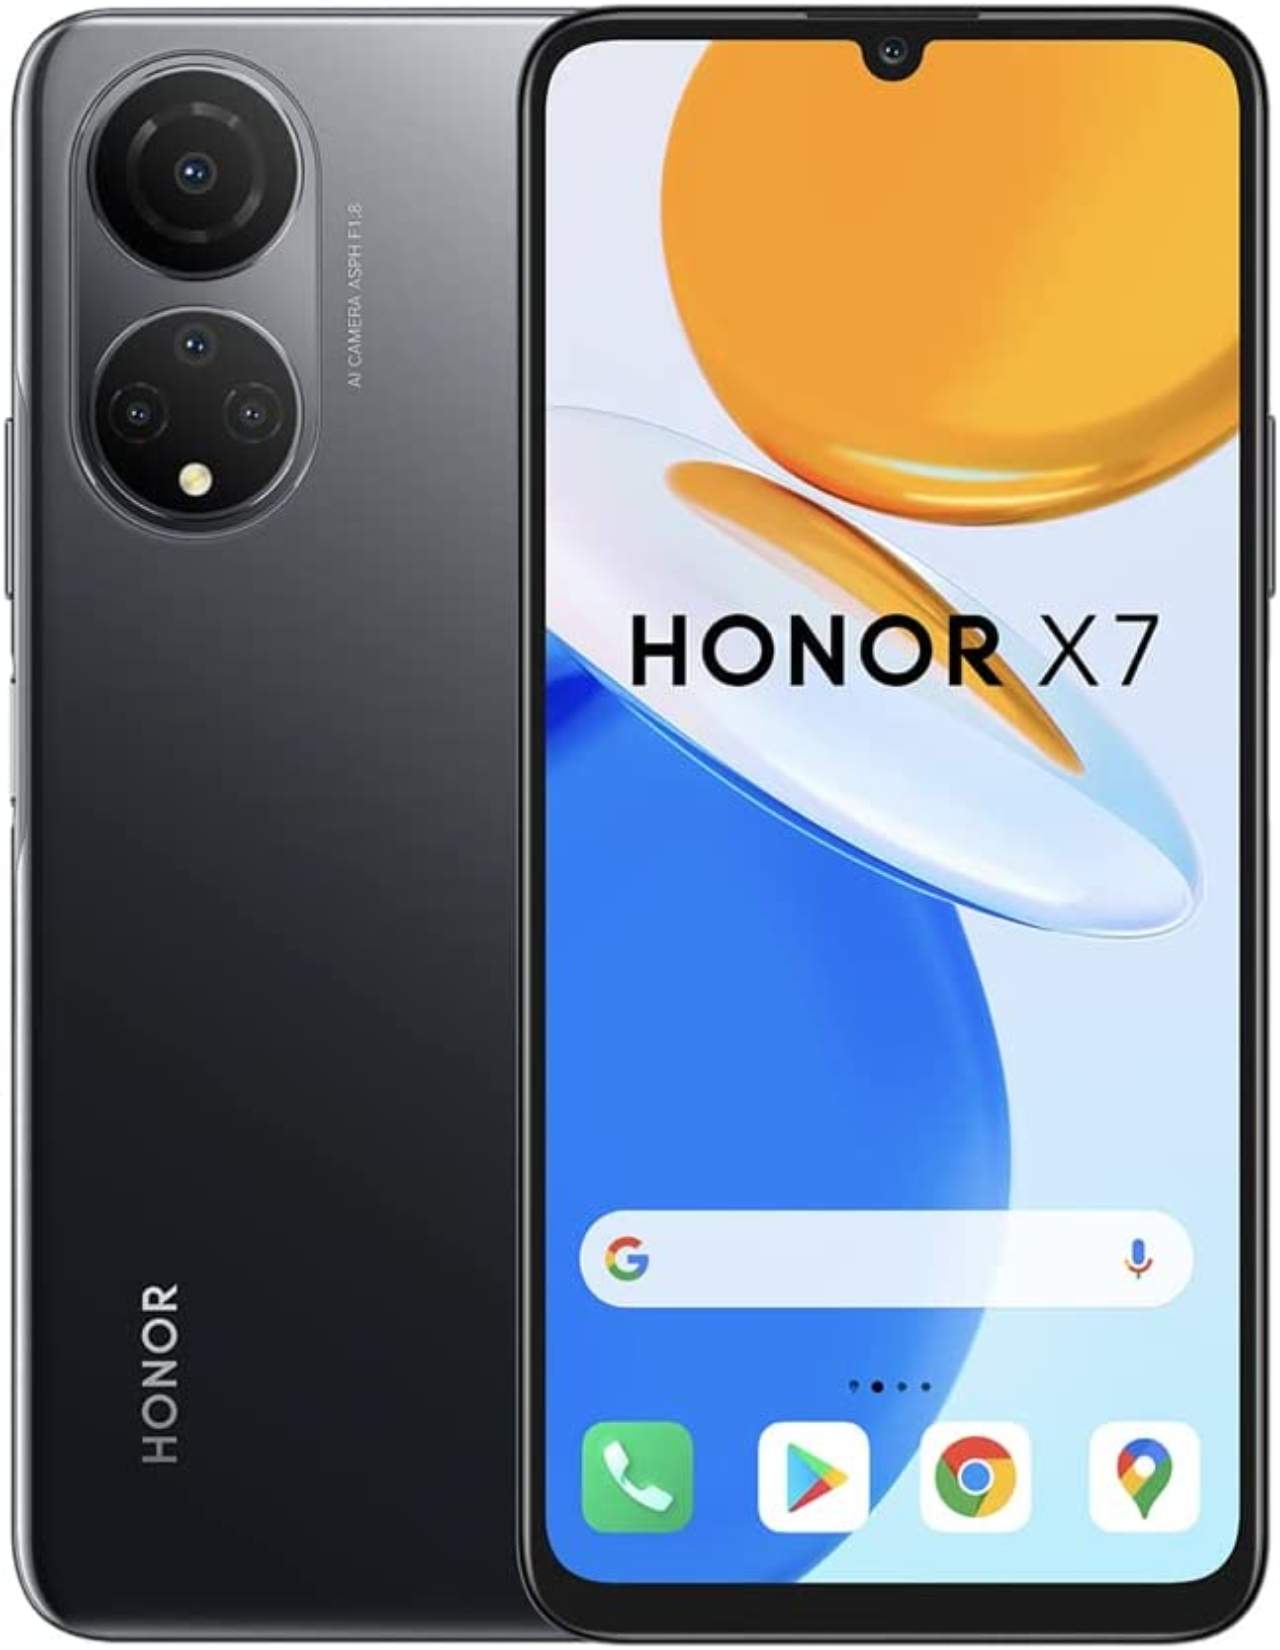 Lo smartphone Android Honor X7